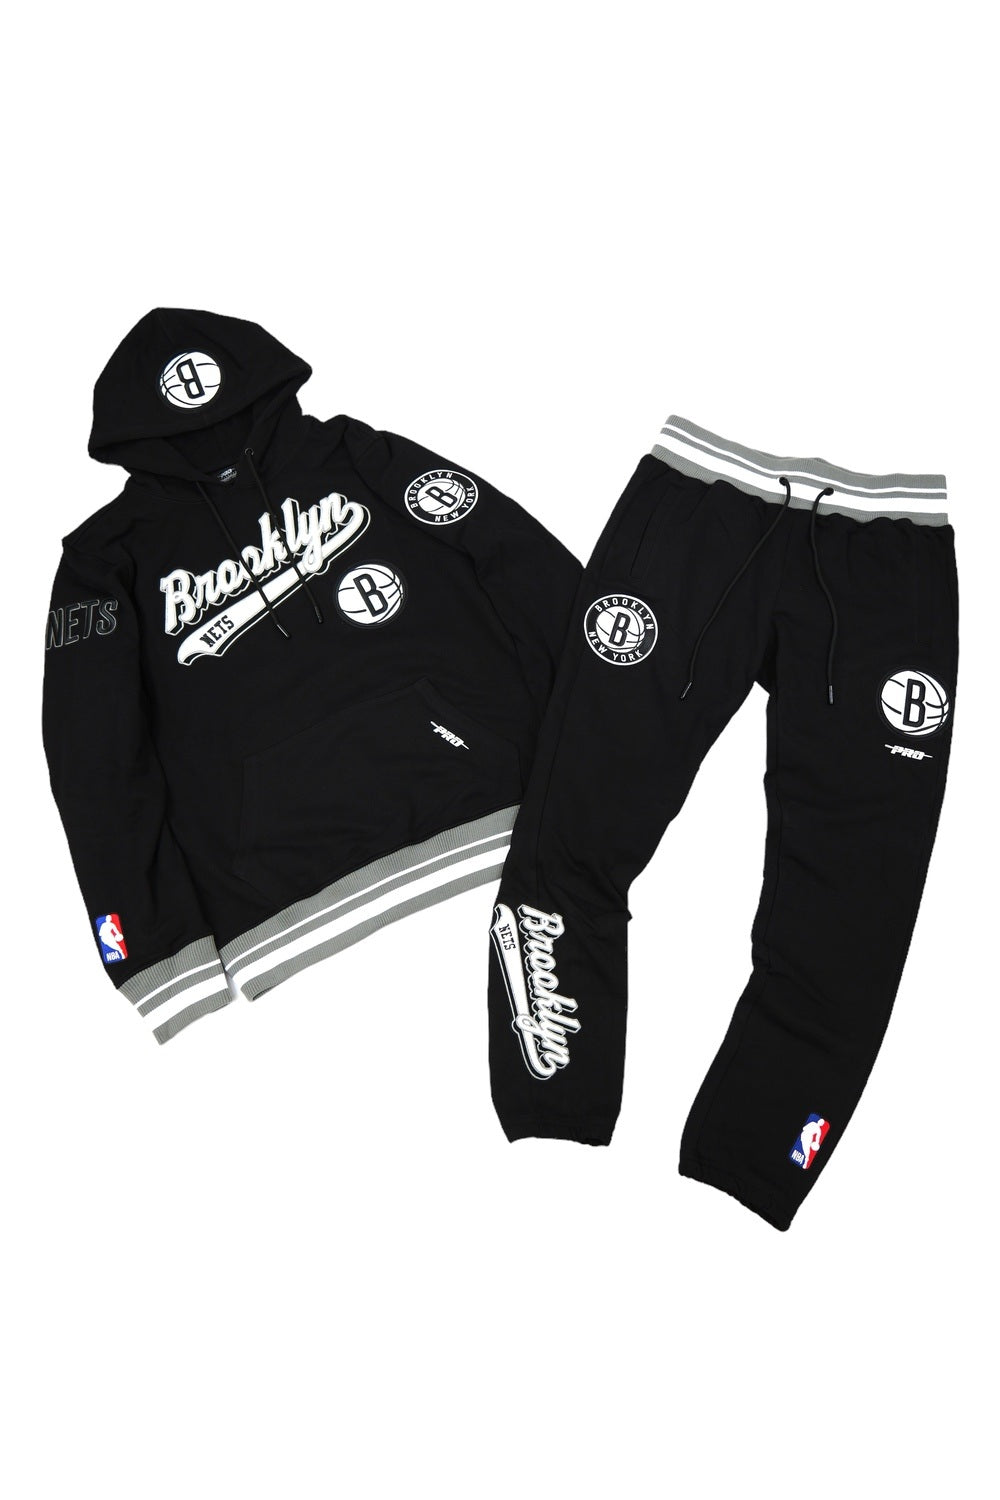 Mens Pro Standard Brooklyn Nets Outfit